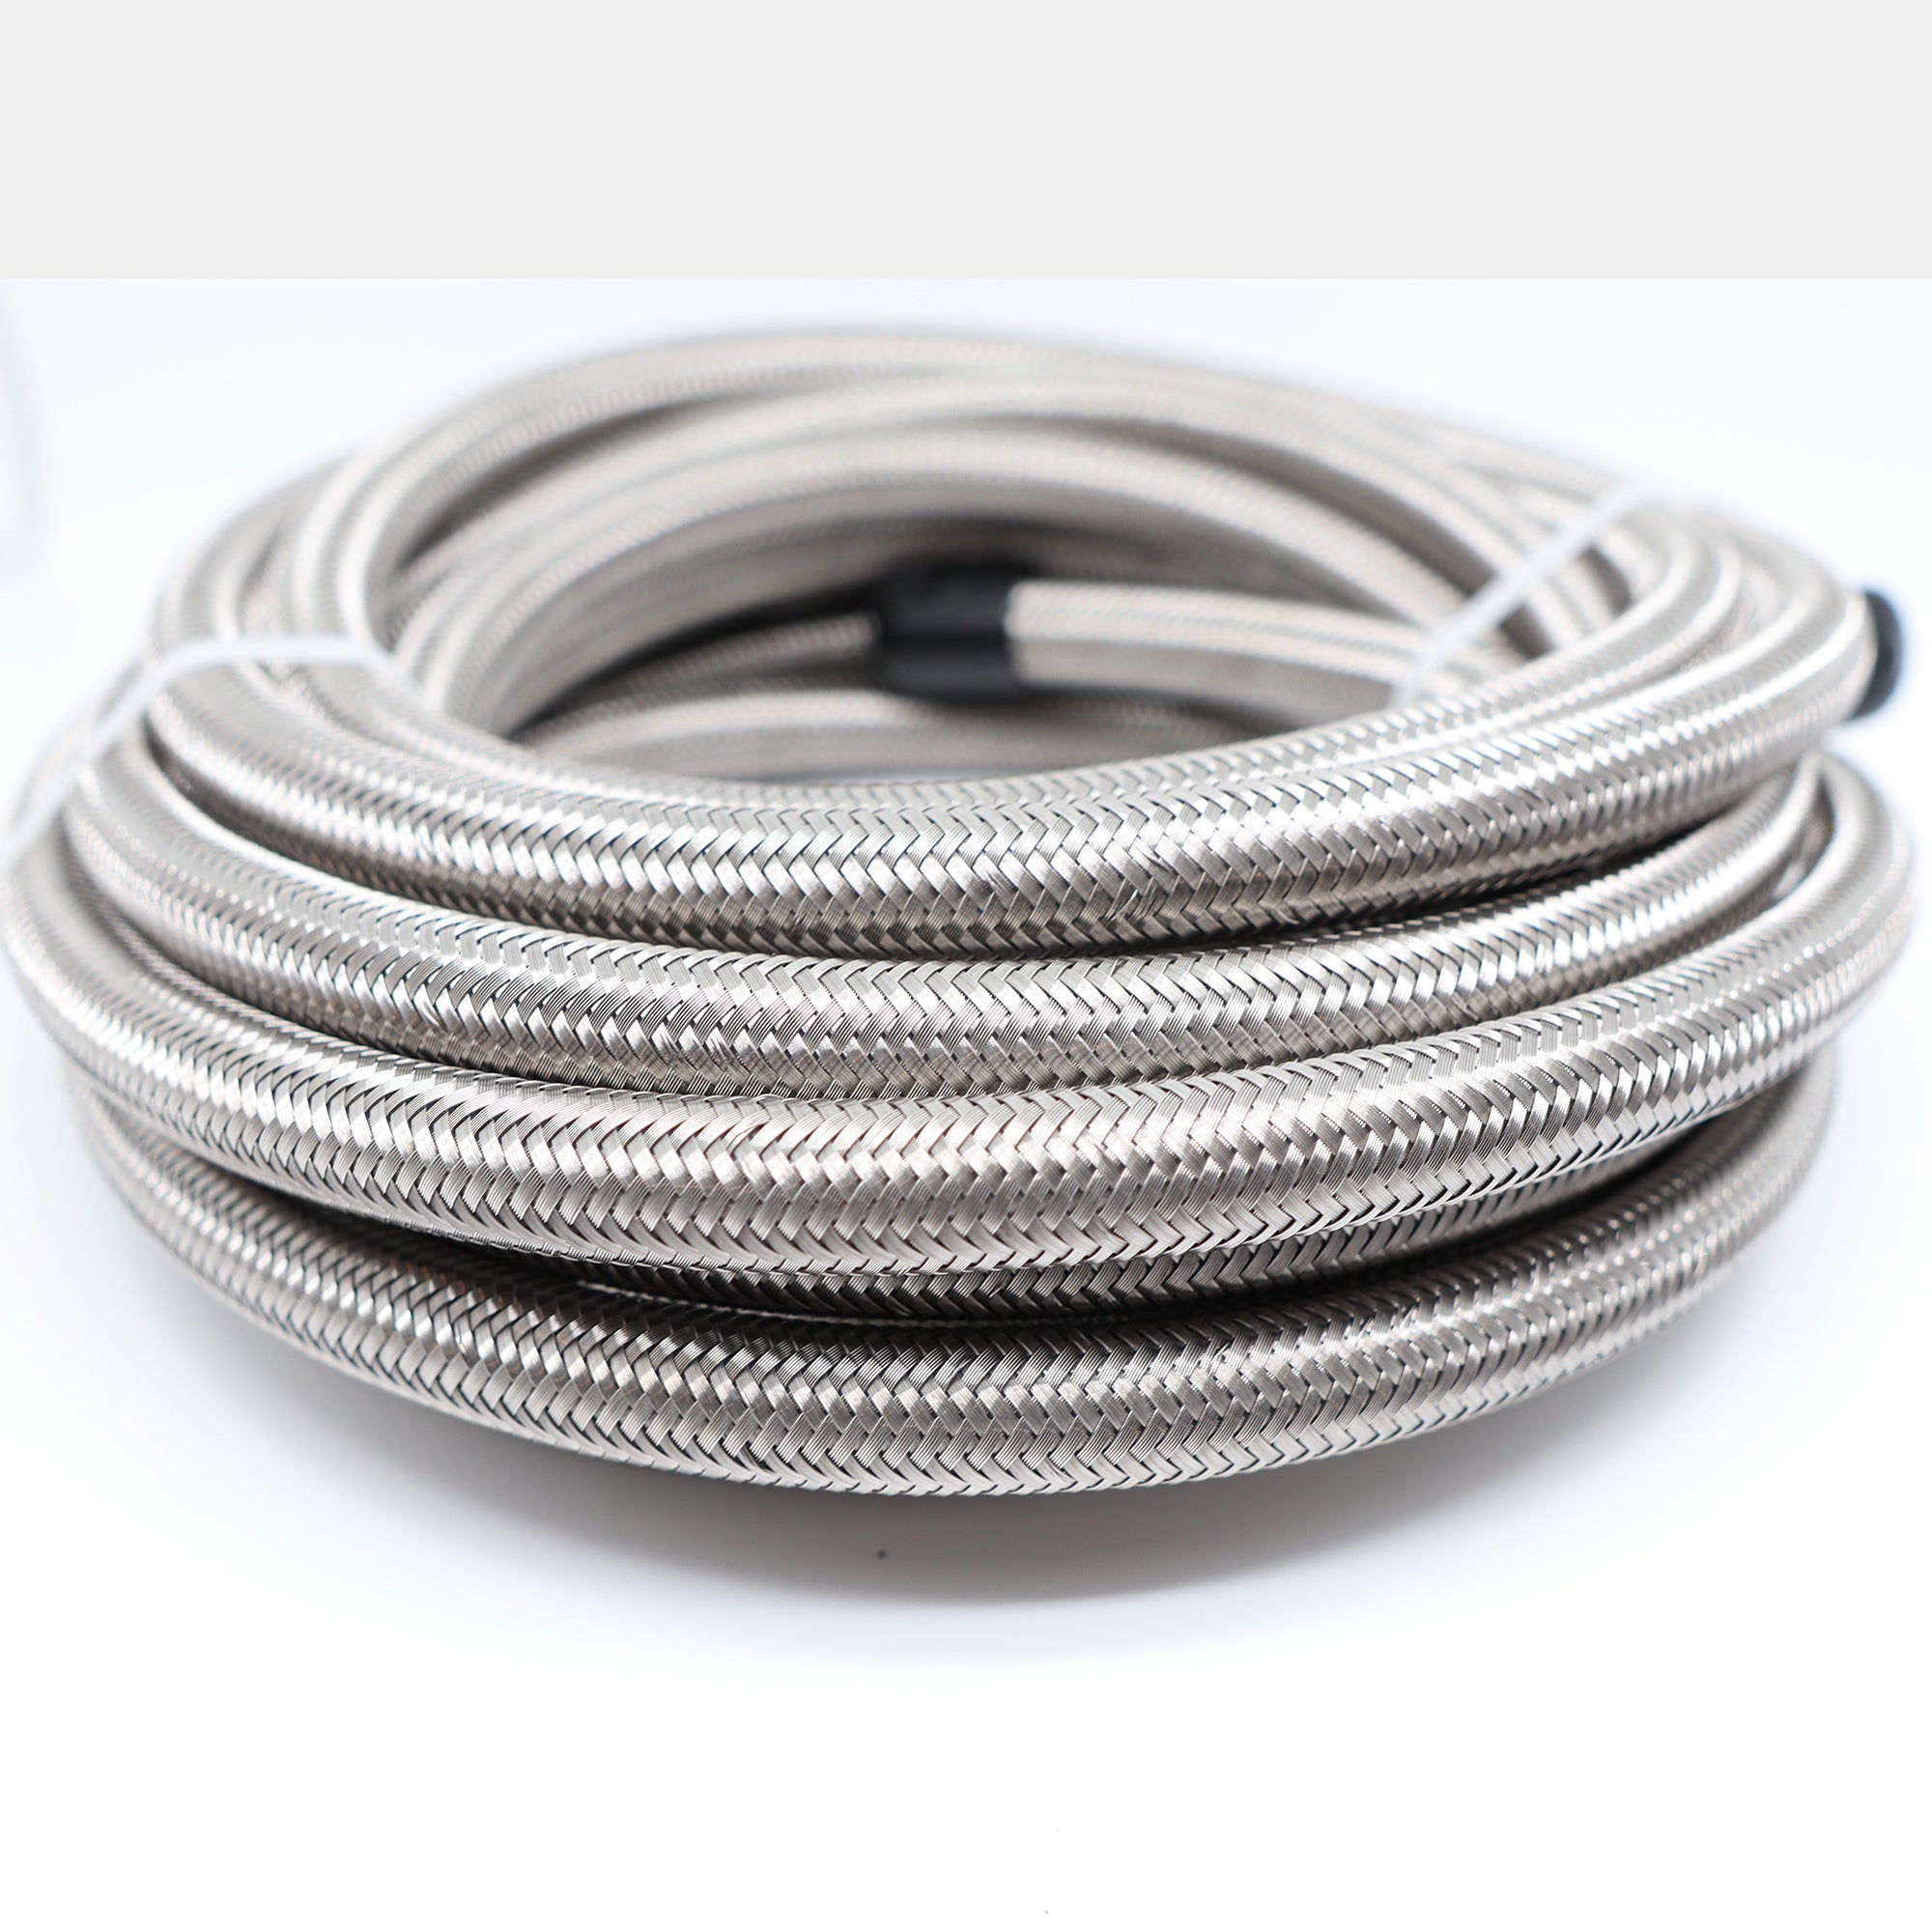 -12 AN 12AN 11/16" Braided Stainless Steel Rubber Fuel Line Hose 20FT